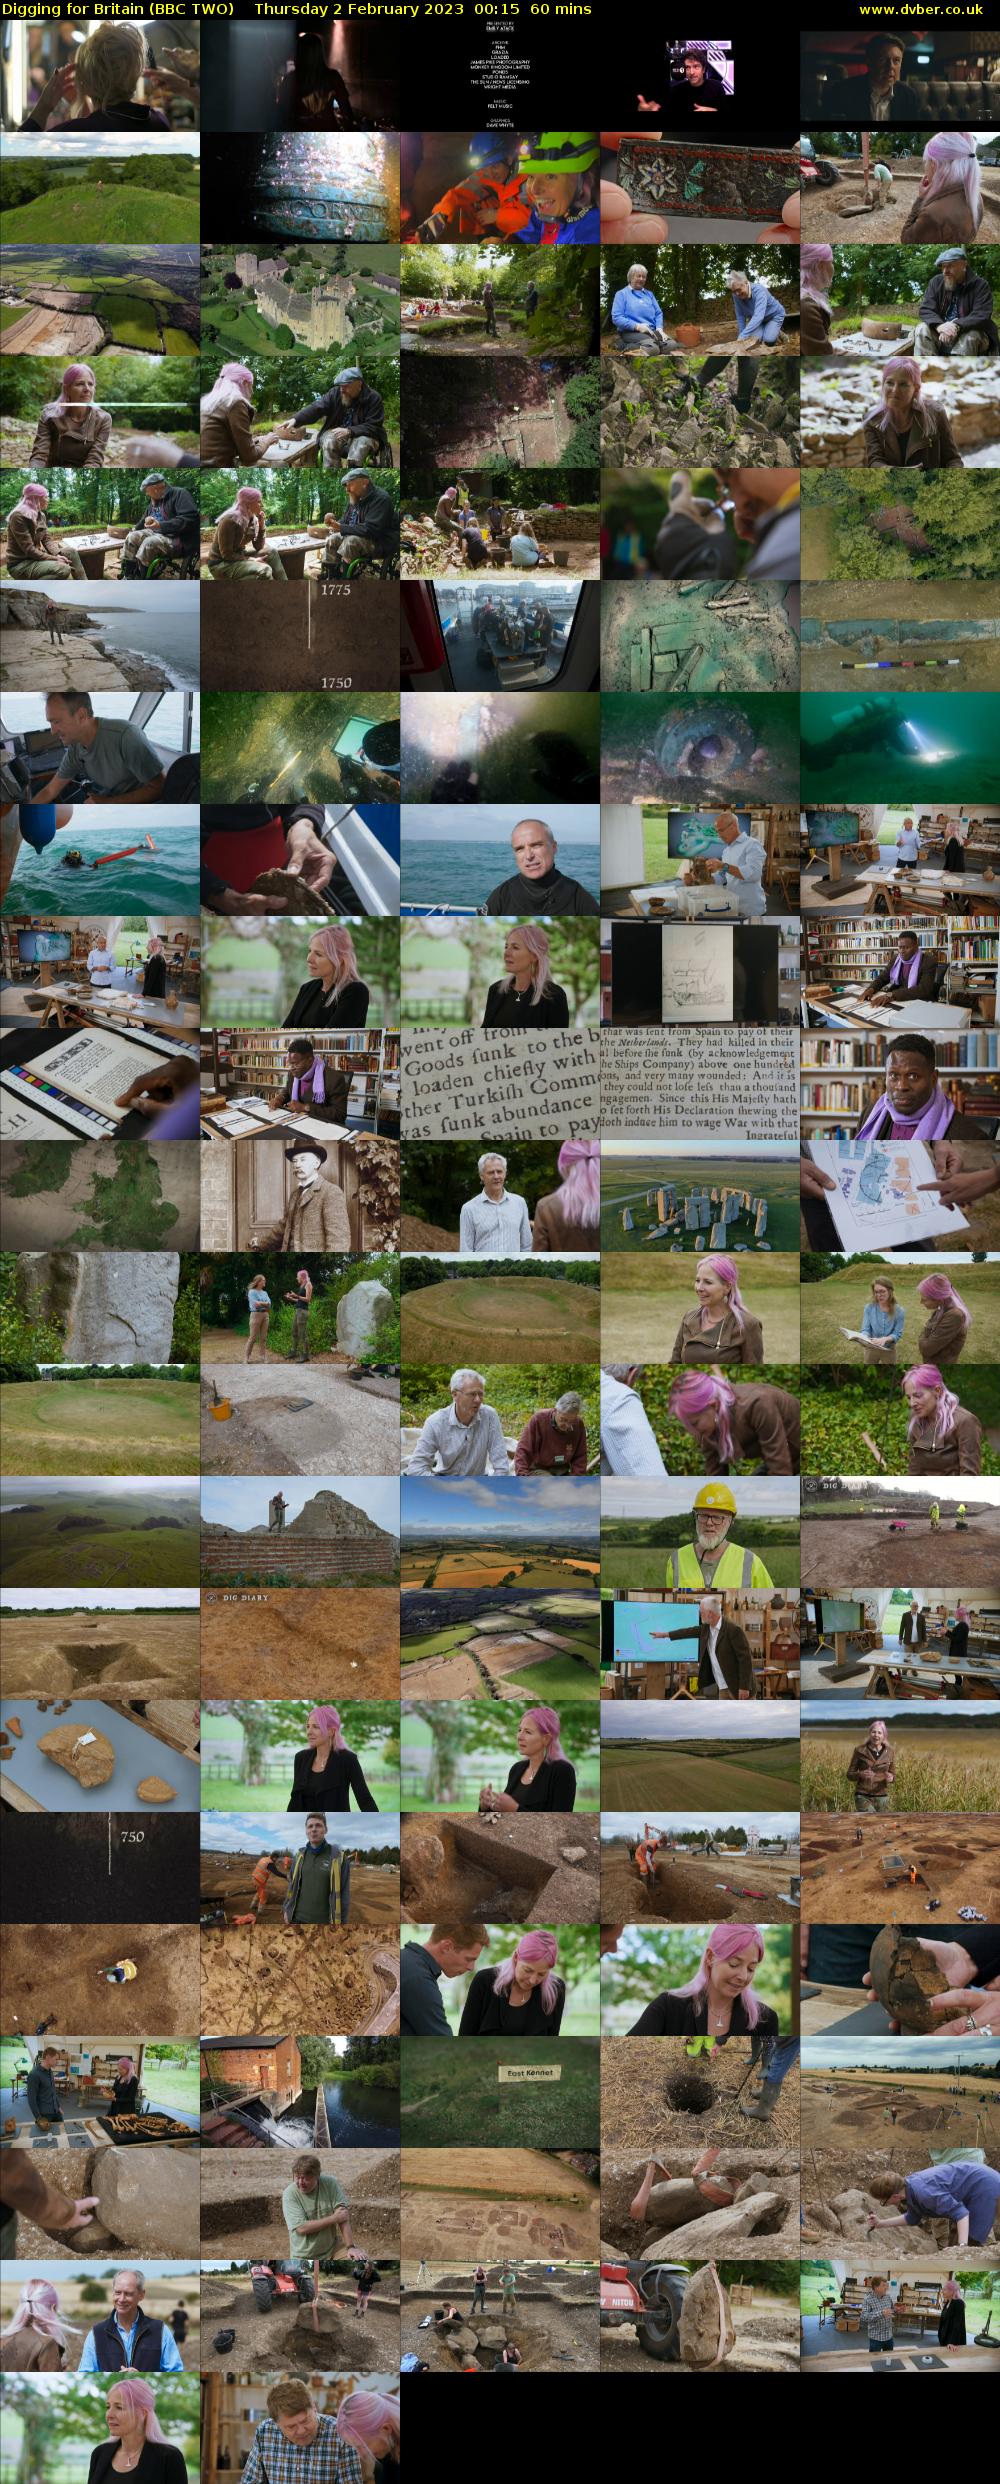 Digging for Britain (BBC TWO) Thursday 2 February 2023 00:15 - 01:15